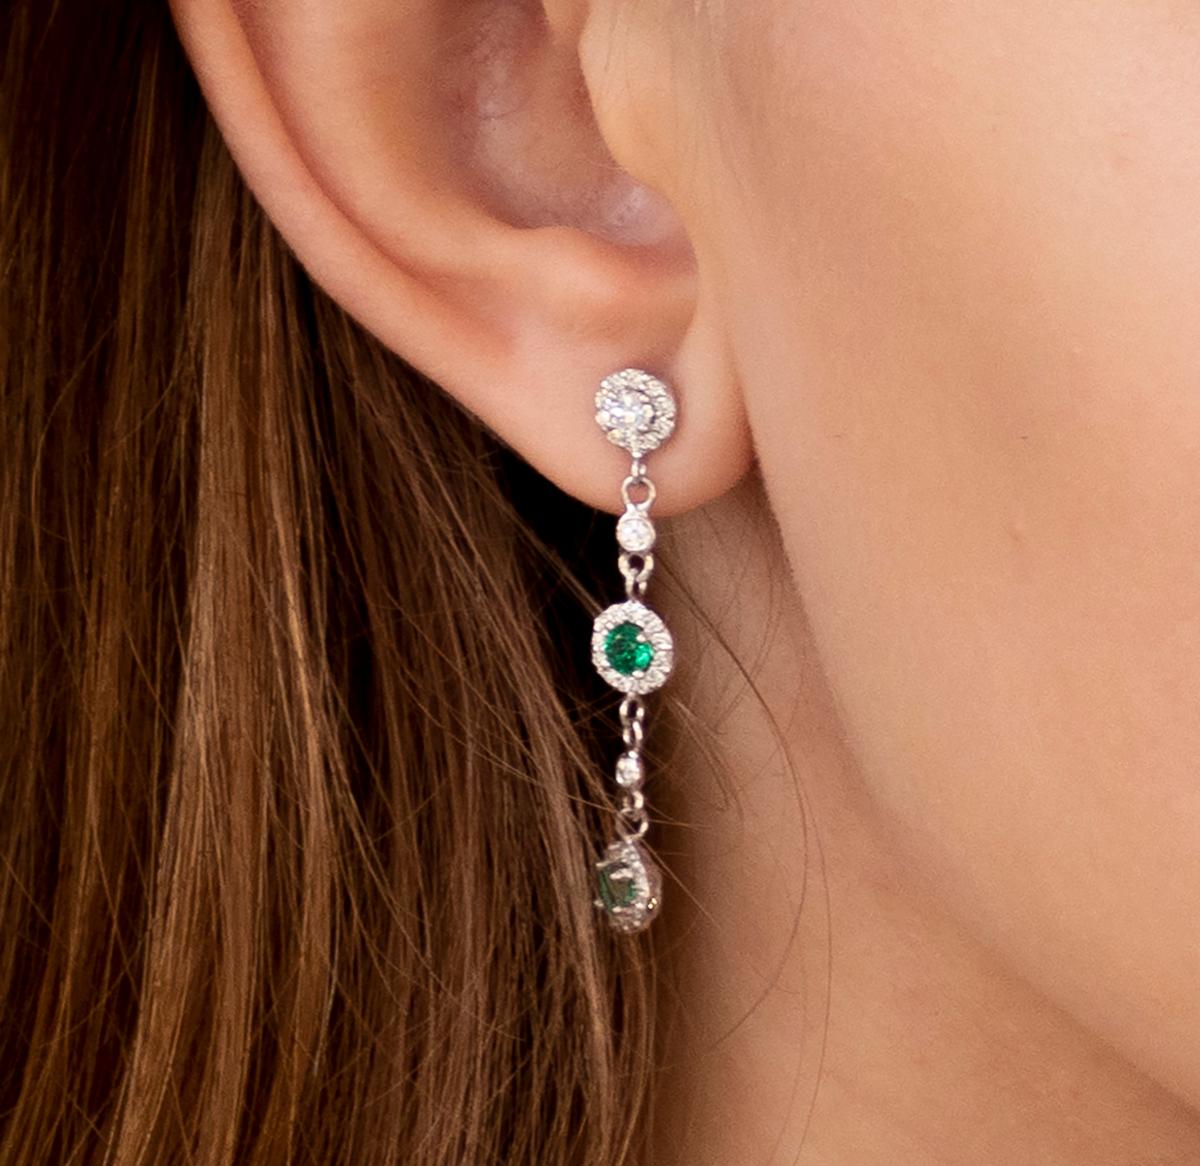 Fourteen karat white gold 1..75 inch drop earrings 
Diamond weighing 1.30 carat
Emeralds weighing 0.65 carat 
New Earrings
Handmade in USA
The 14 karat gold earrings are hanging off a post with push backs
Our design team select gemstones for their